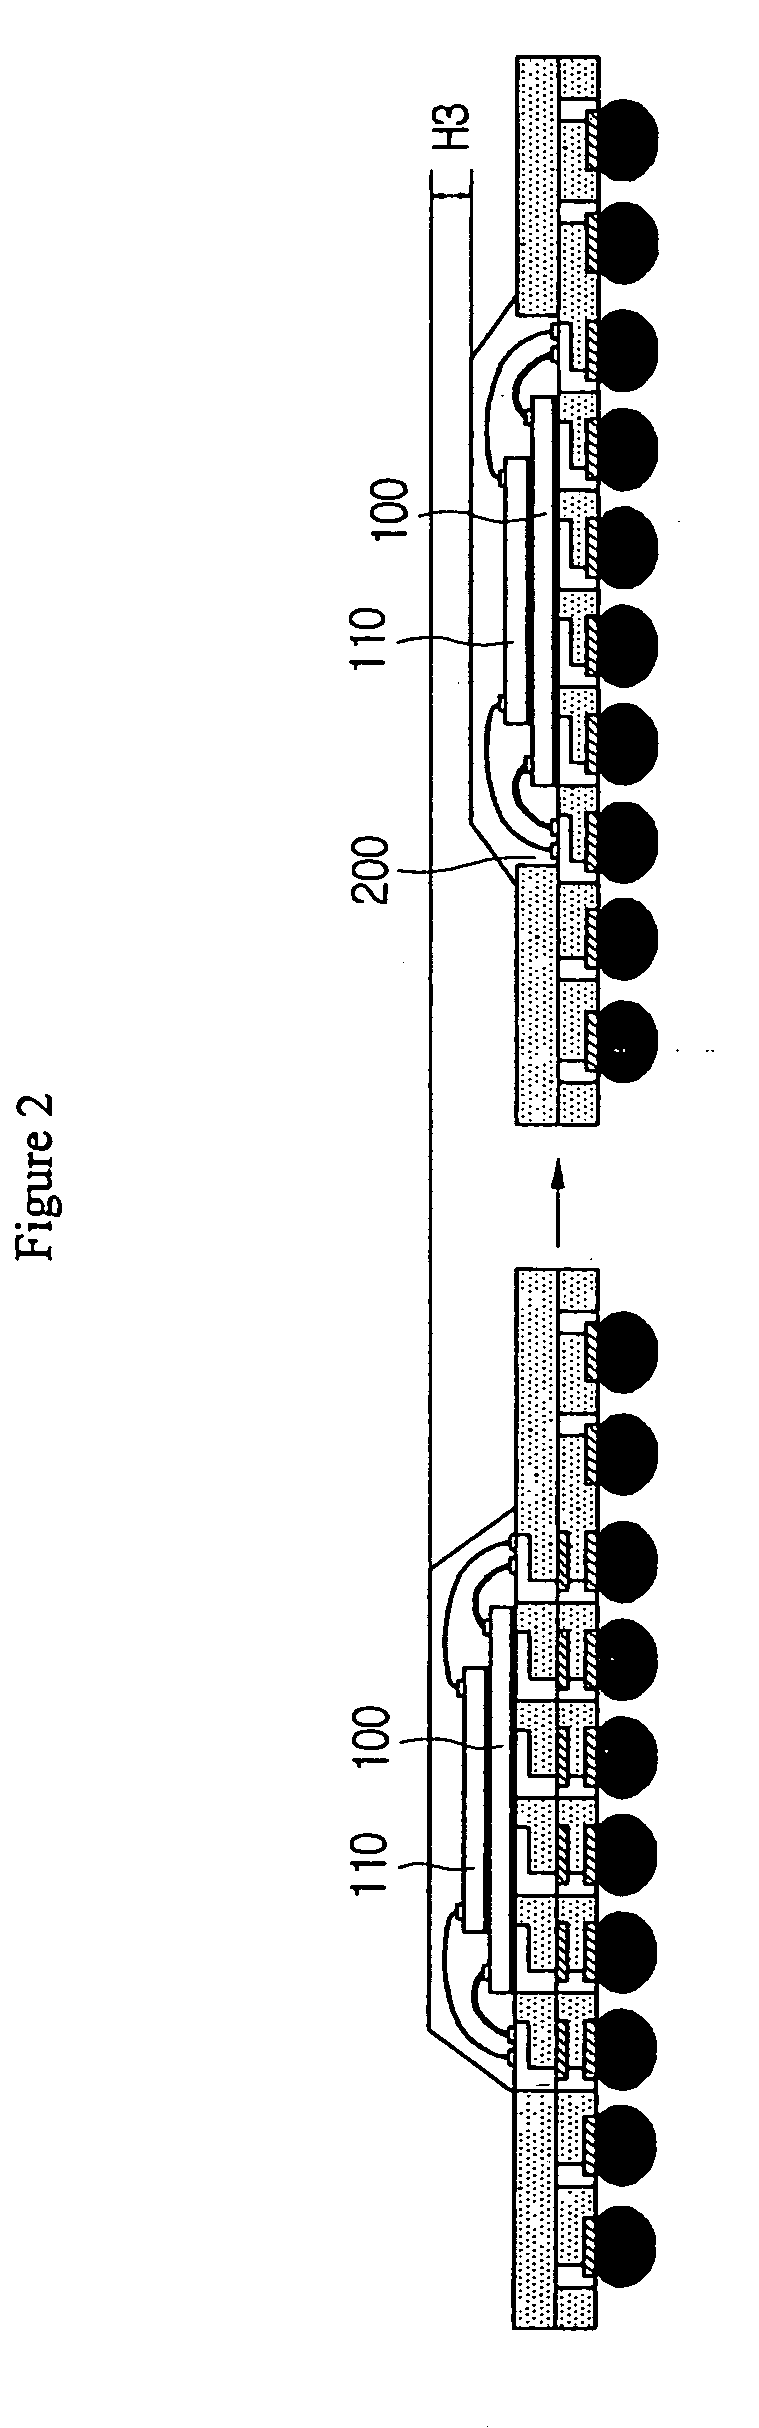 Rigid-flexible printed circuit board manufacturing method for package on package